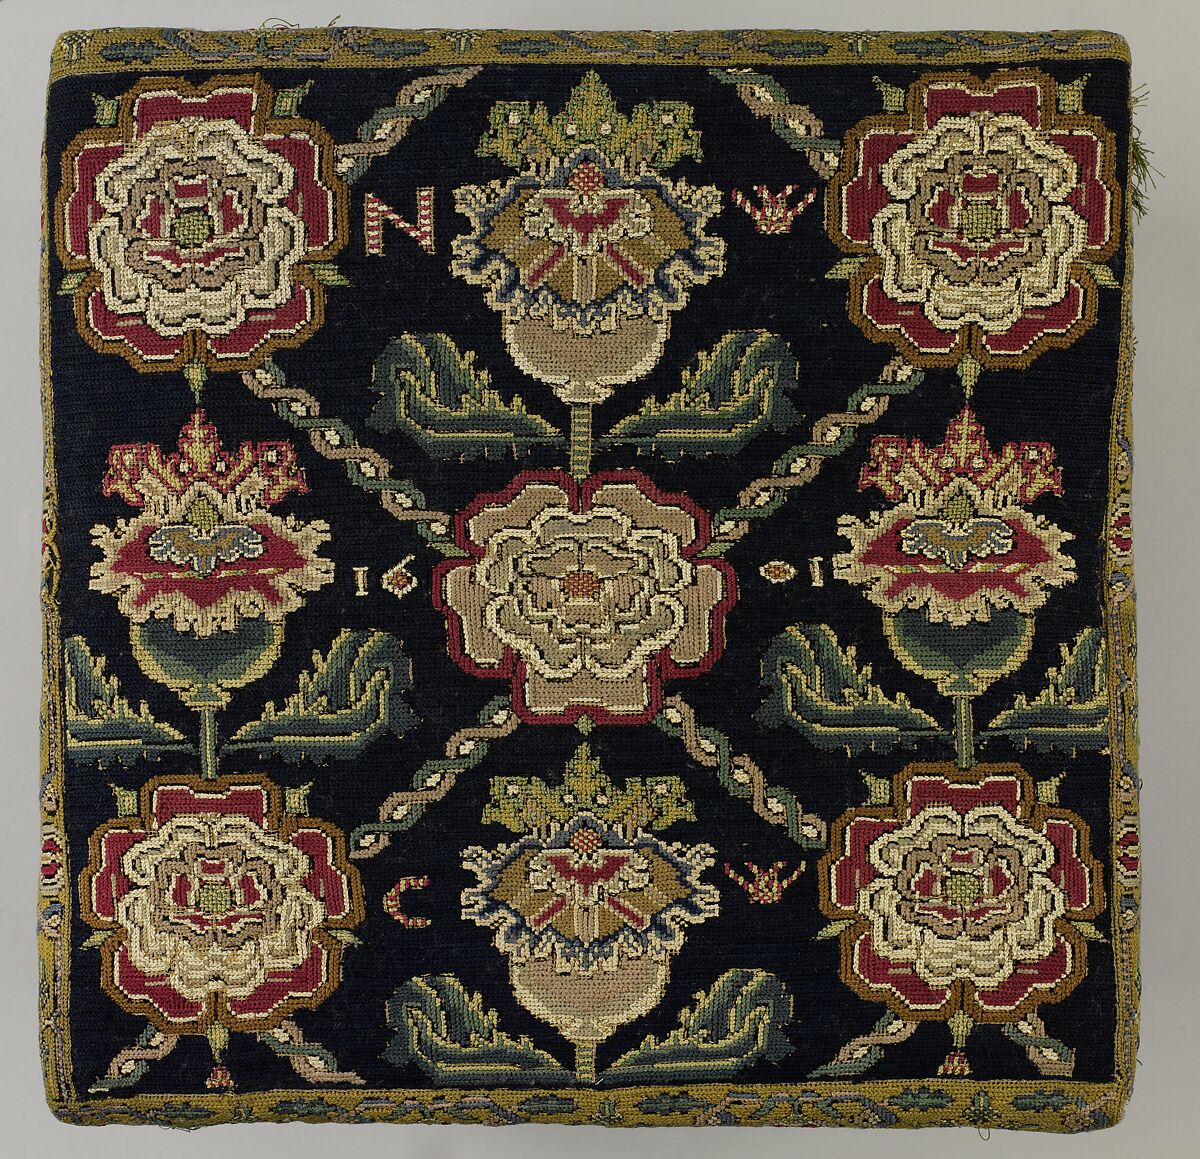 Cushion cover, Canvas embroidered with wool and silk thread; cross and long-armed cross stitches, British 